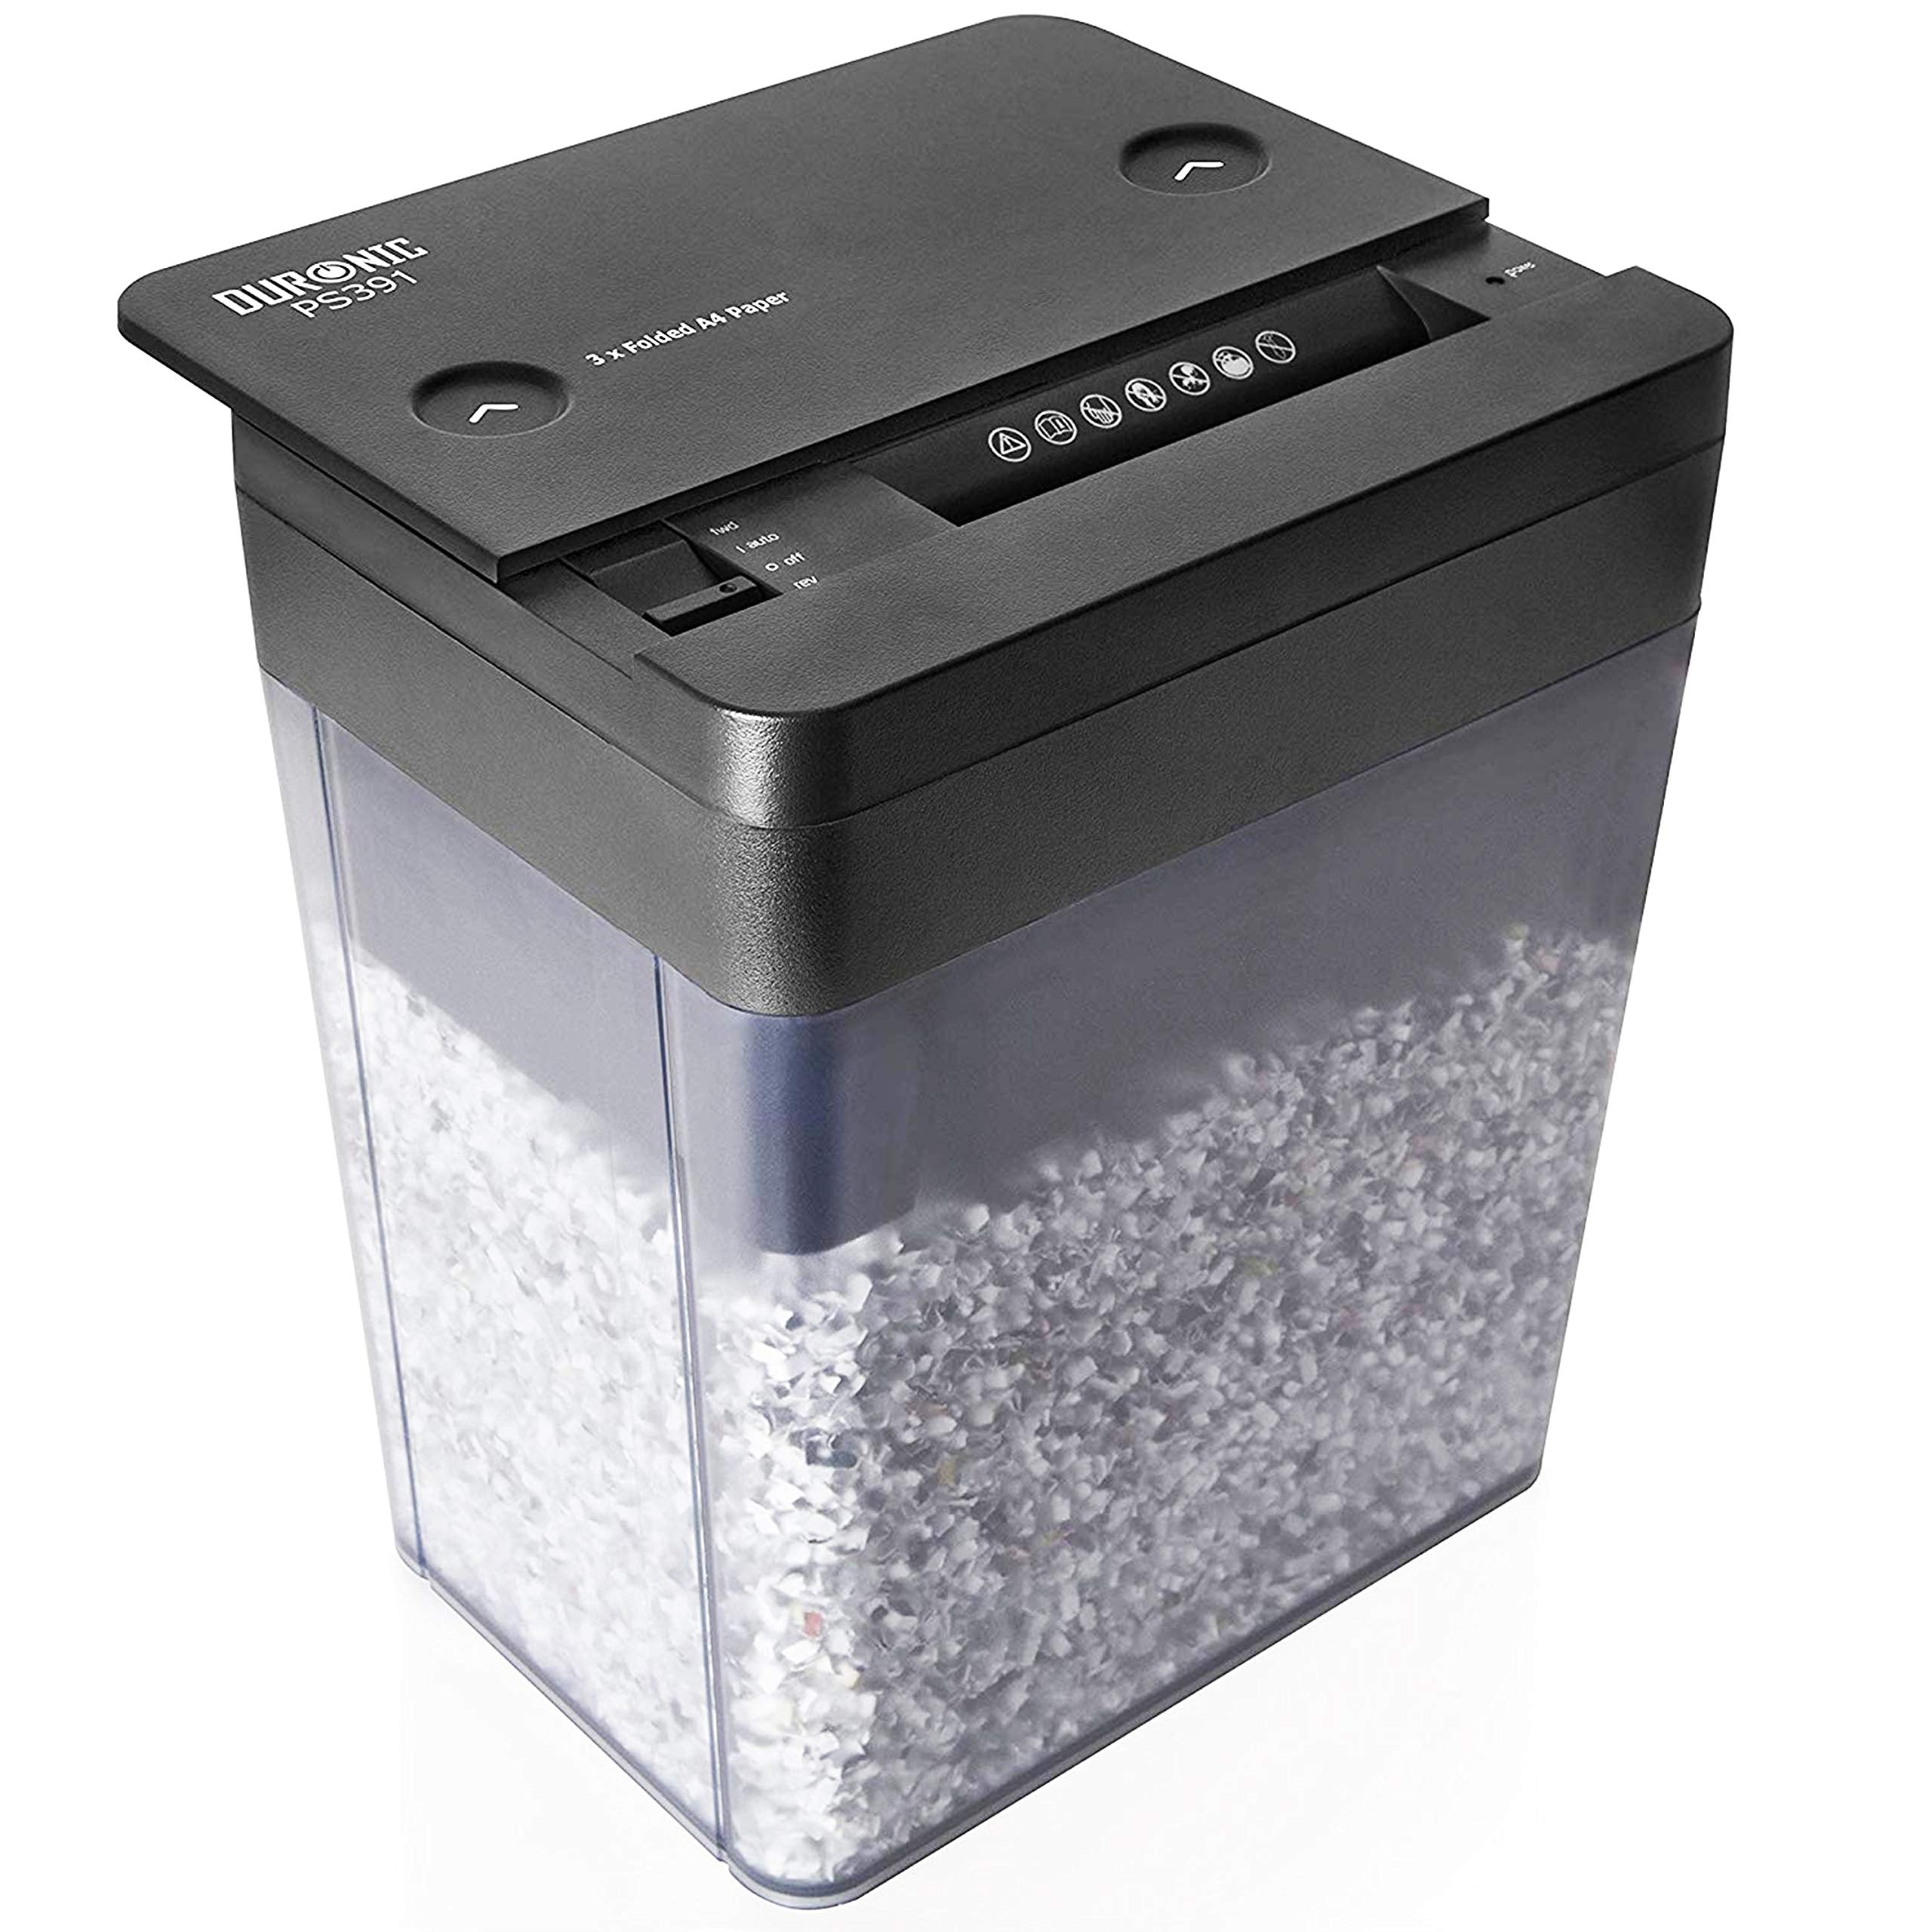 Duronic Paper Shredder PS391 Micro Cross Cut Electric Office Mini Desktop Paper Shredder 3X A4 Folded Sheets at a Time GDPR Compliant: Protects Against Data Theft 5L Bin